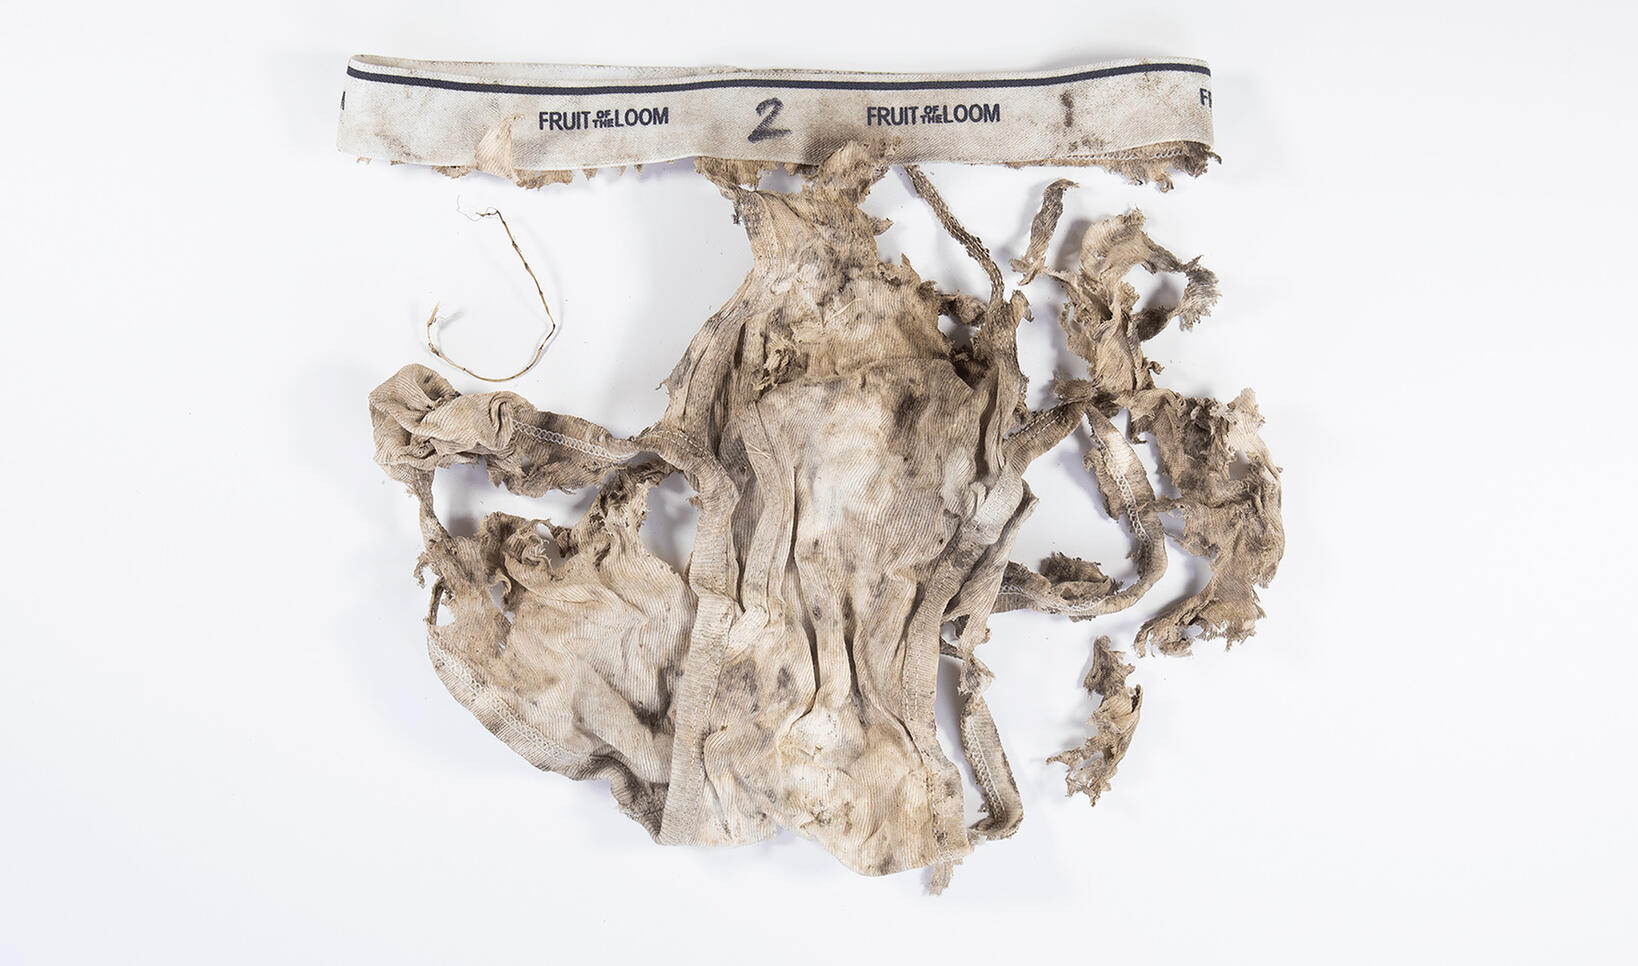 Underpants #2, 2020. Bacteria and fungal diversity tested on-site through brief burial ; Gudrun Lock